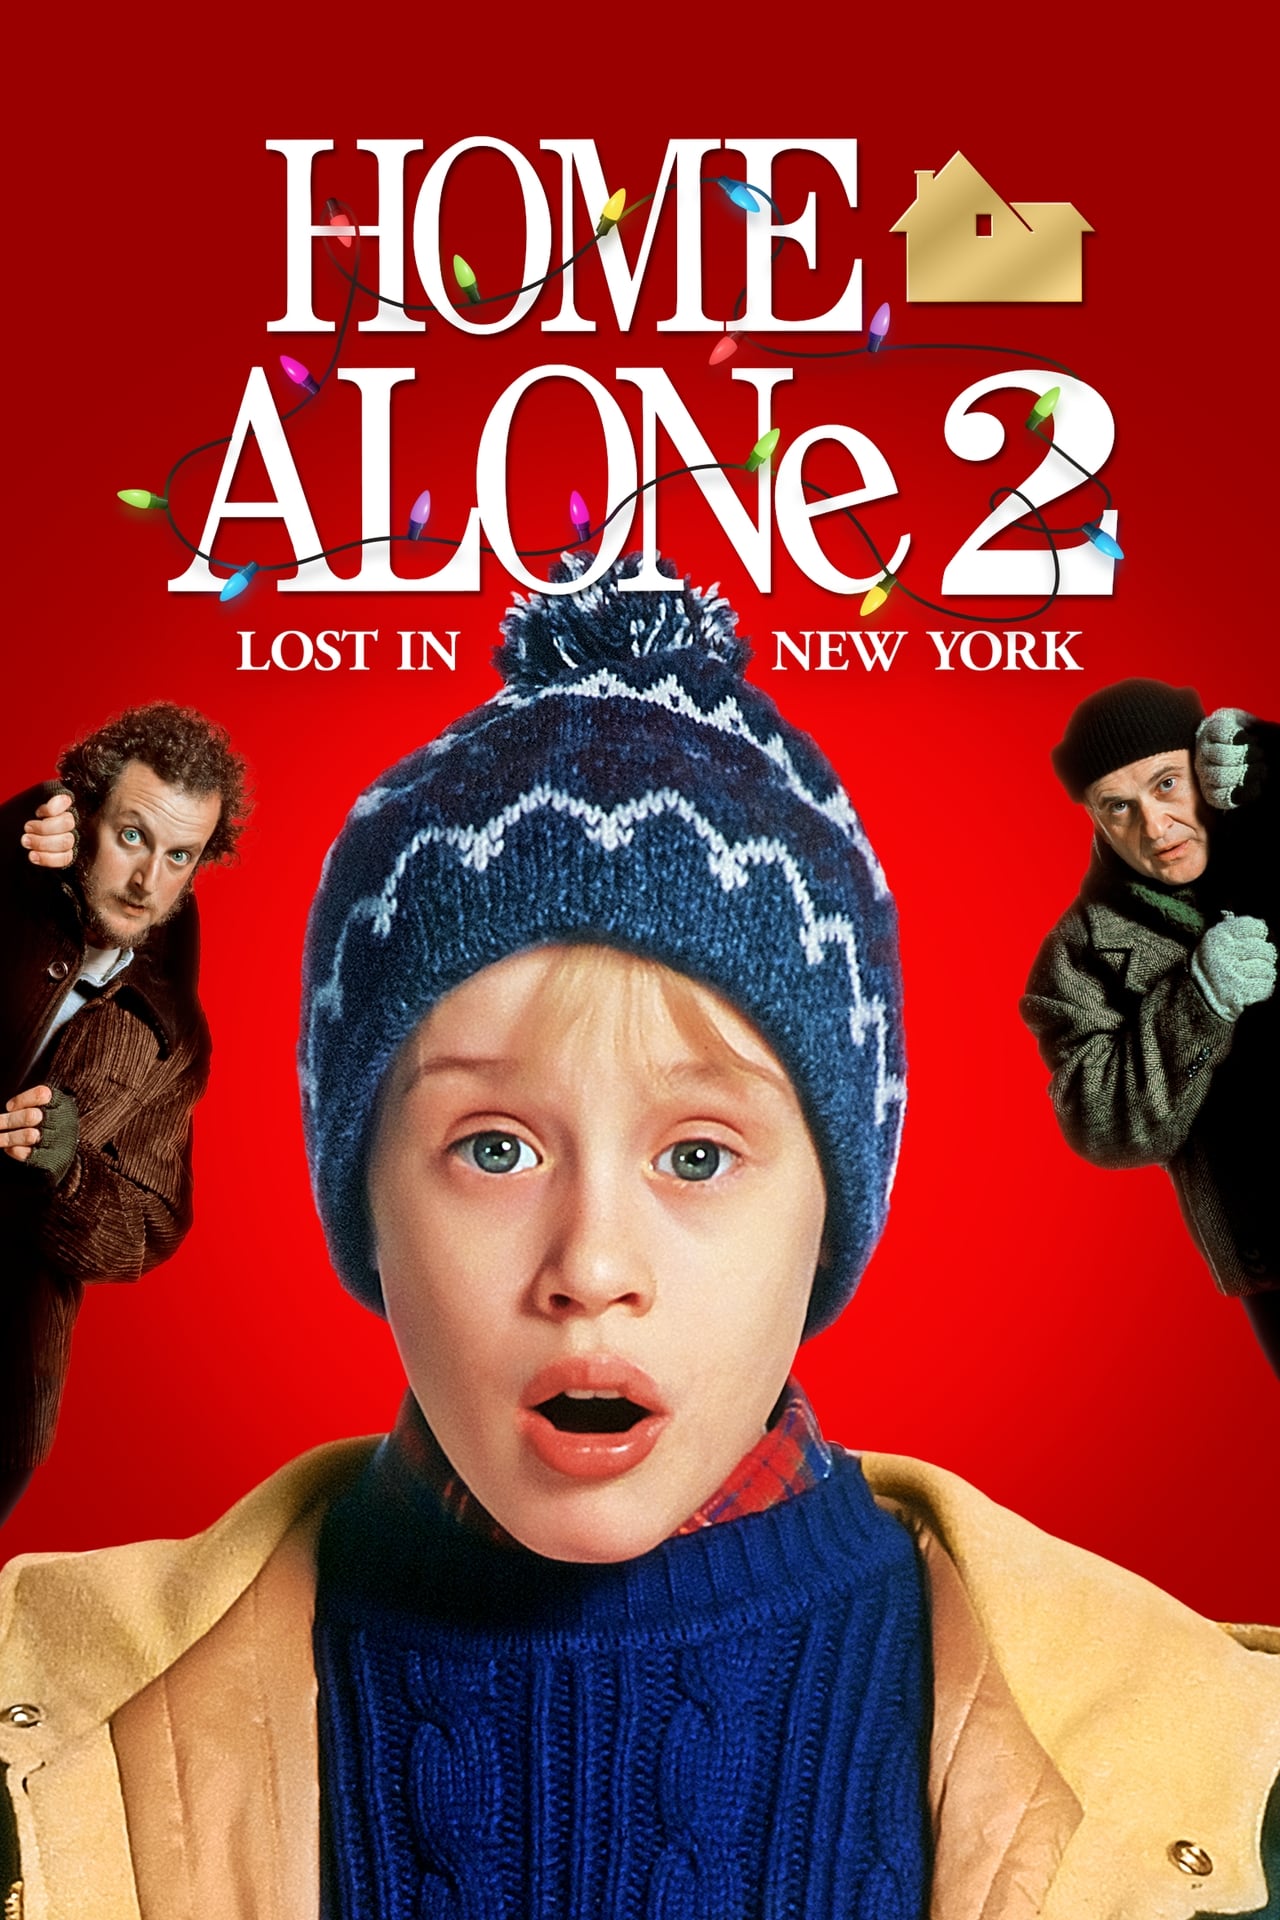 home alone 2 lost in new york movie review